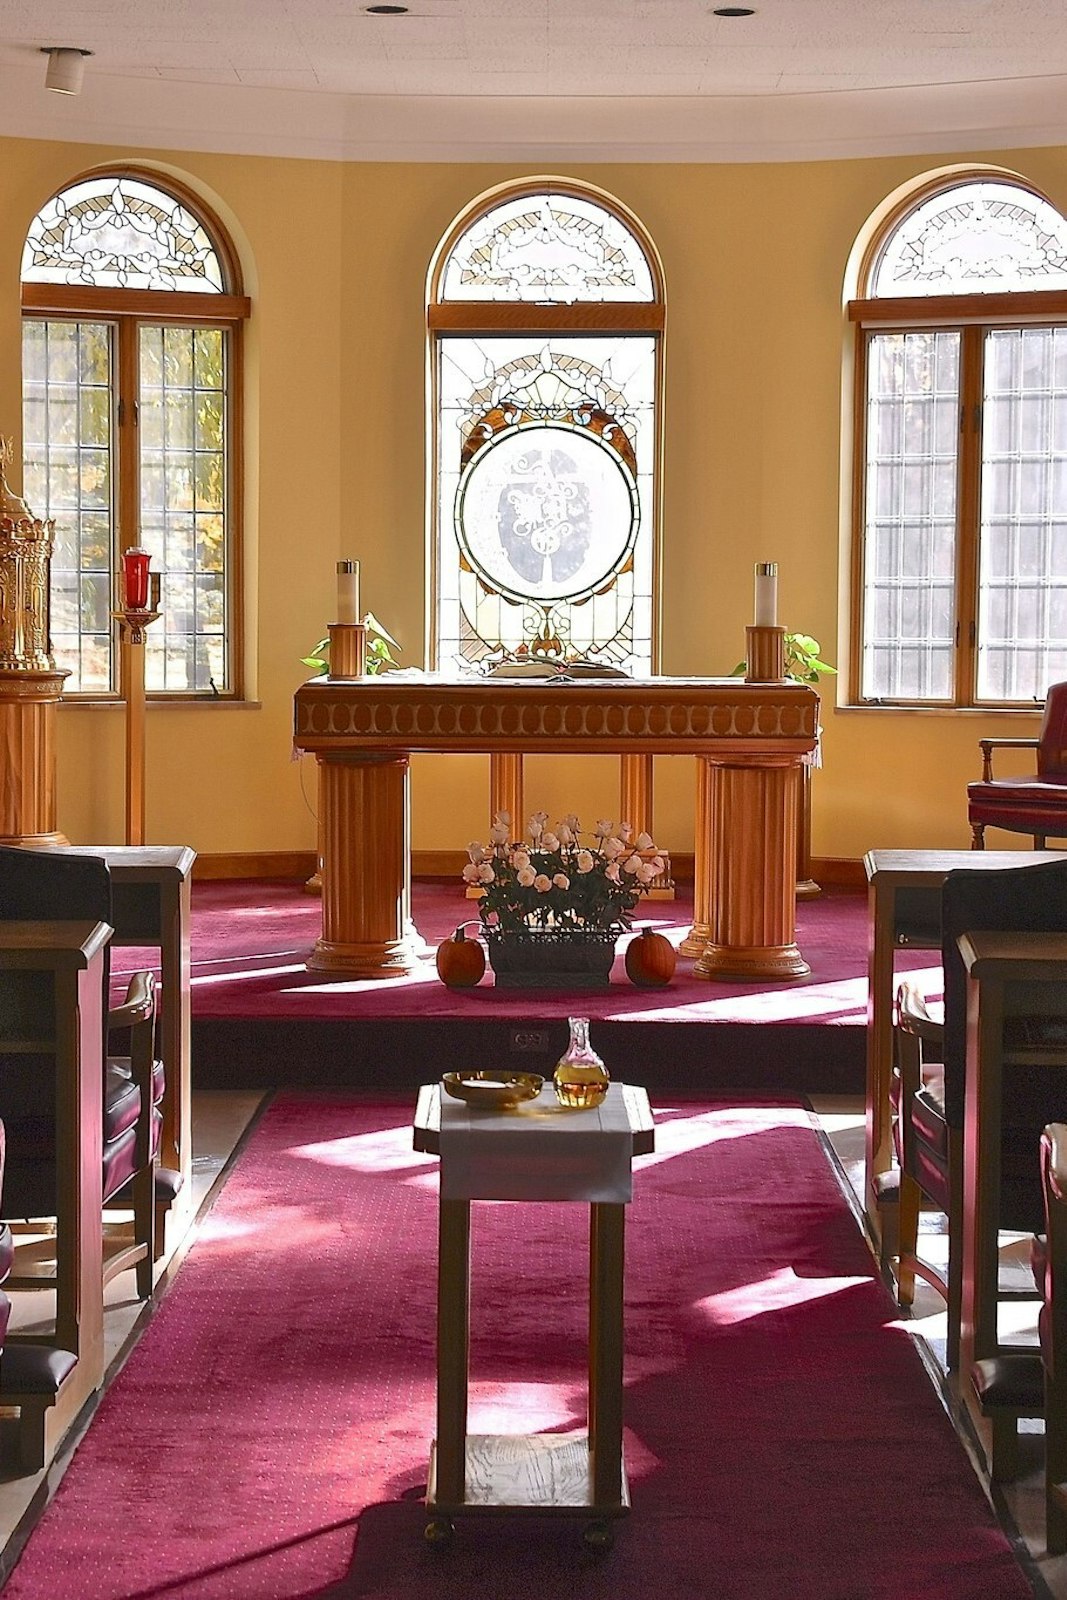 The chapel at Manresa Jesuit Retreat House in Bloomfield Hills is pictured, where Fr. Hurd and other Jesuits offer Mass during retreats. (Photos courtesy of Manresa Jesuit Retreat House)